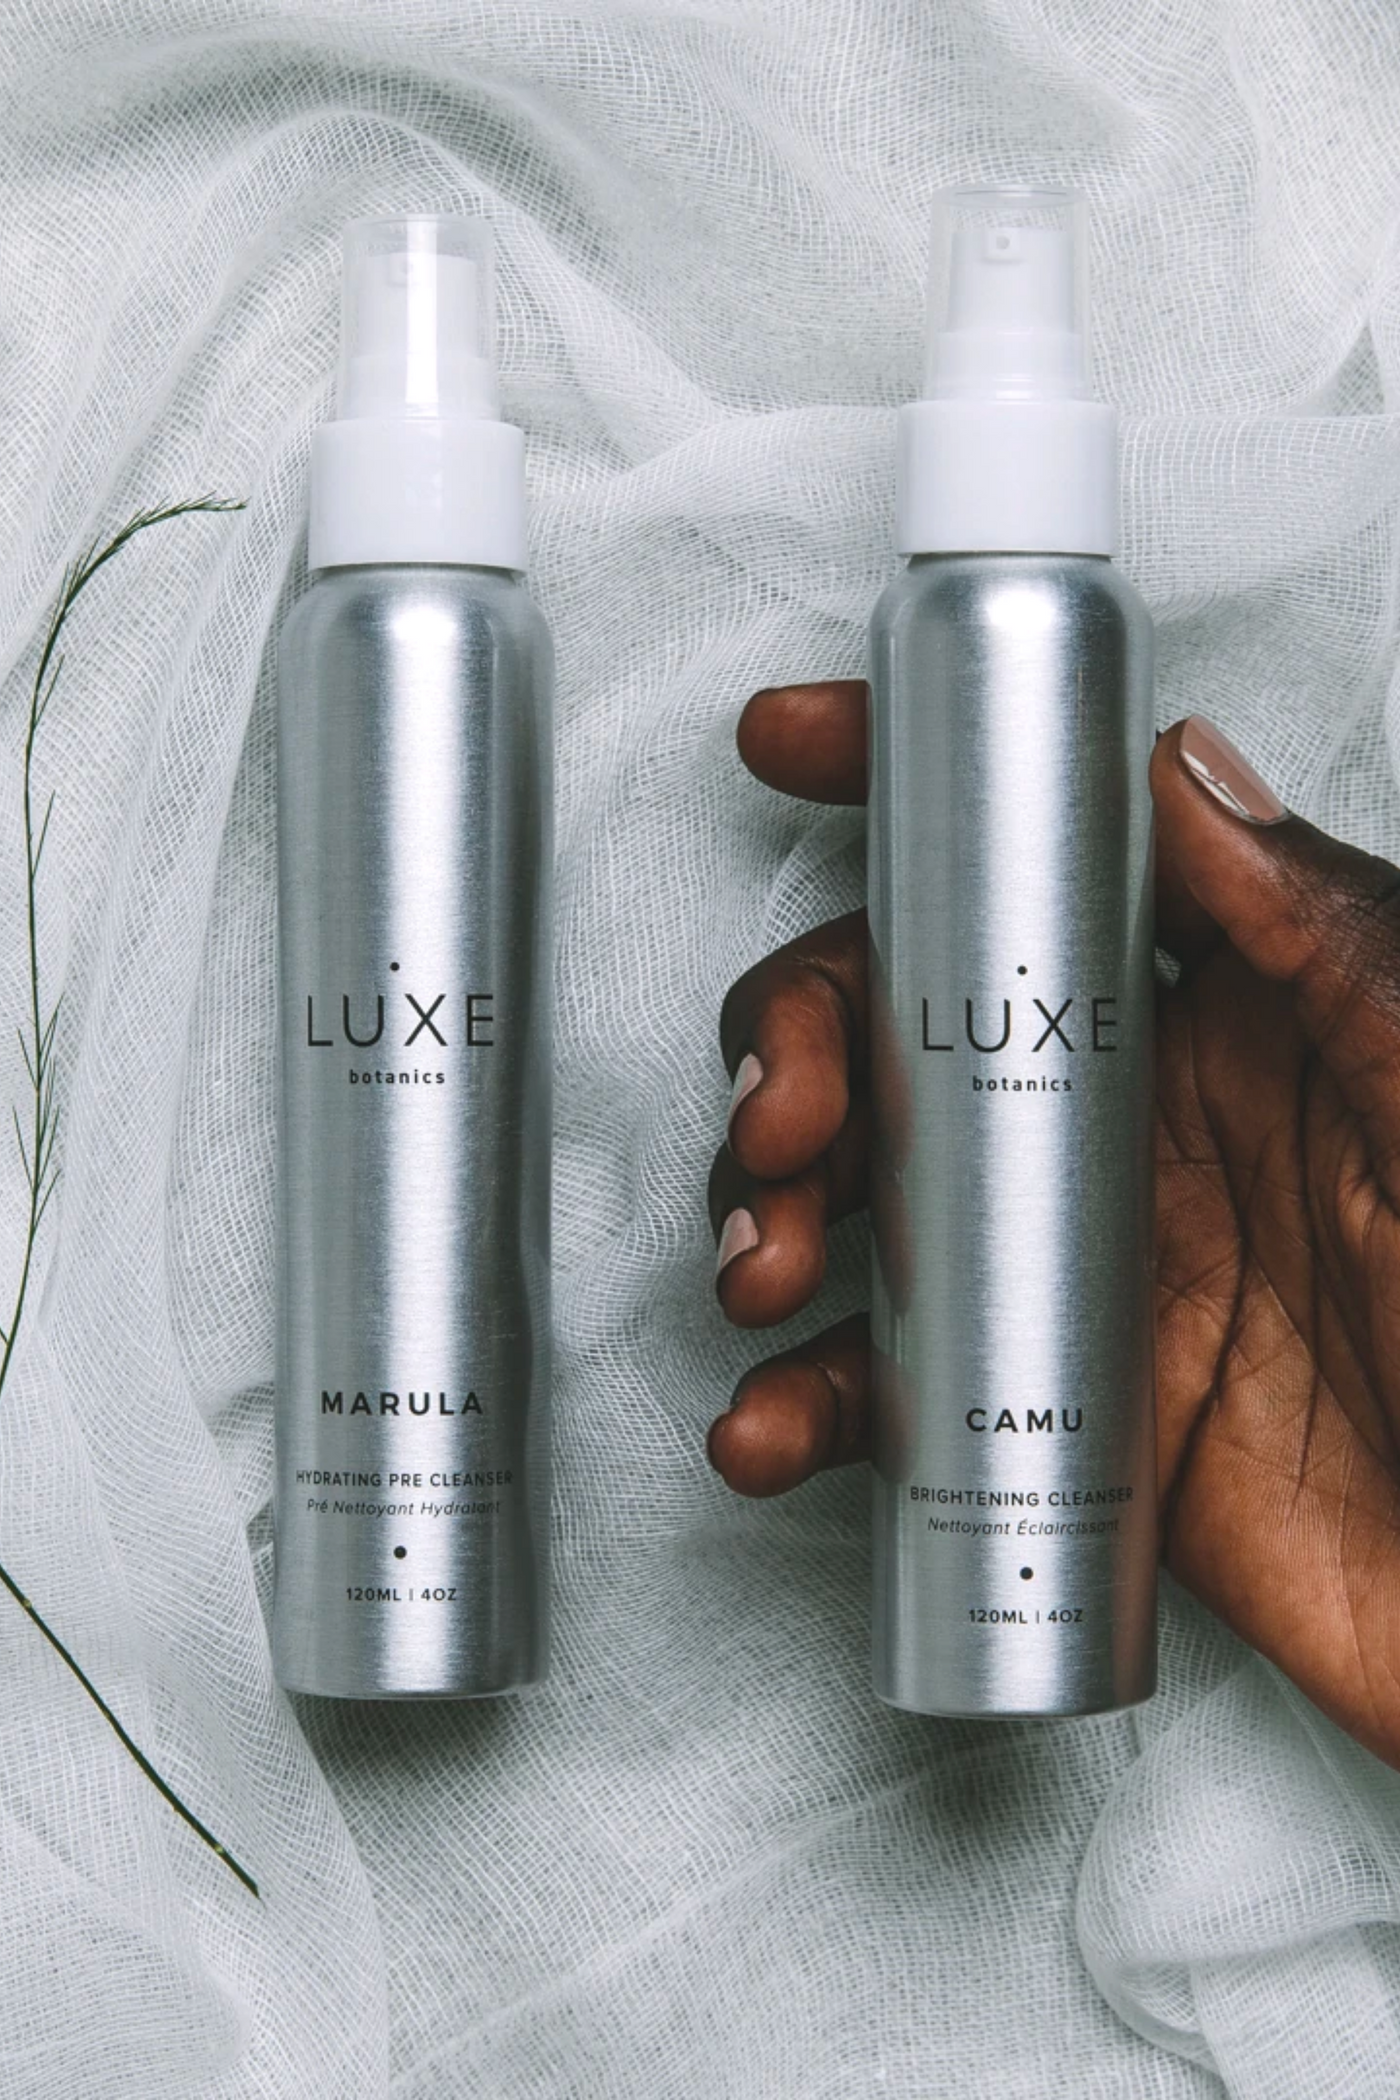 Luxe Botanics Double Cleanse Collection, available on ZERRIN with free Singapore shipping